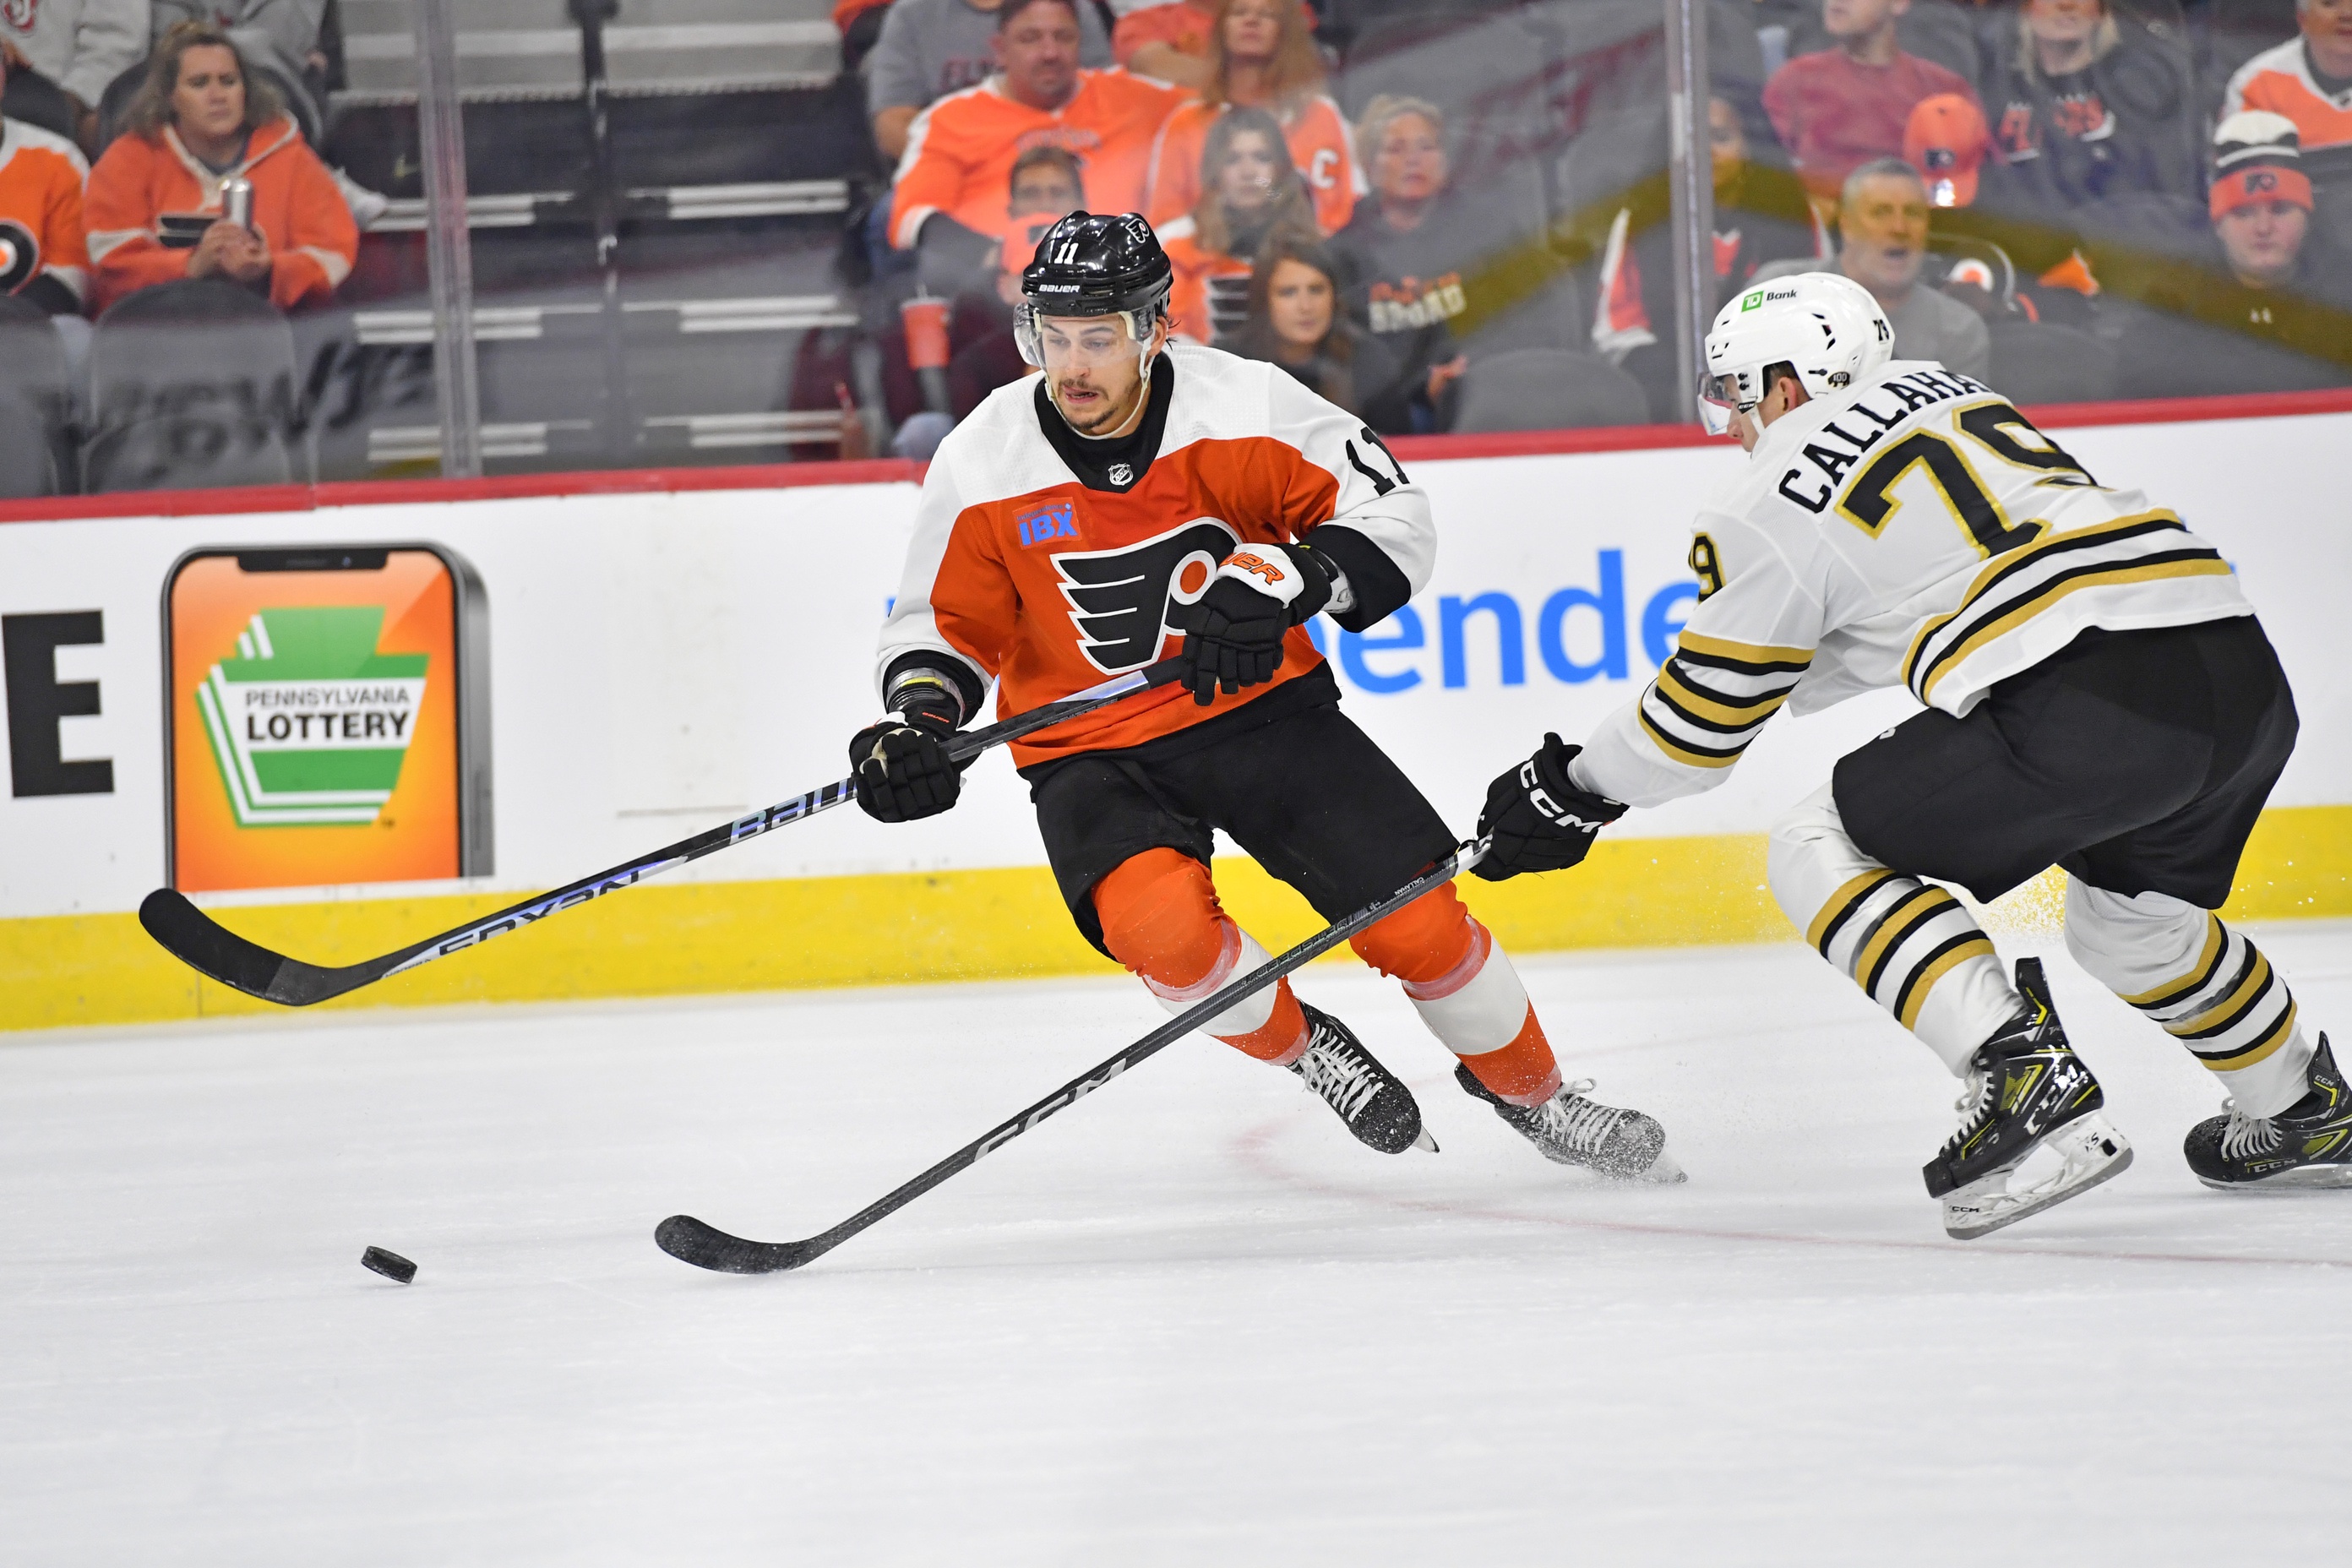 NHL Draft Review and Grades: Philadelphia Flyers